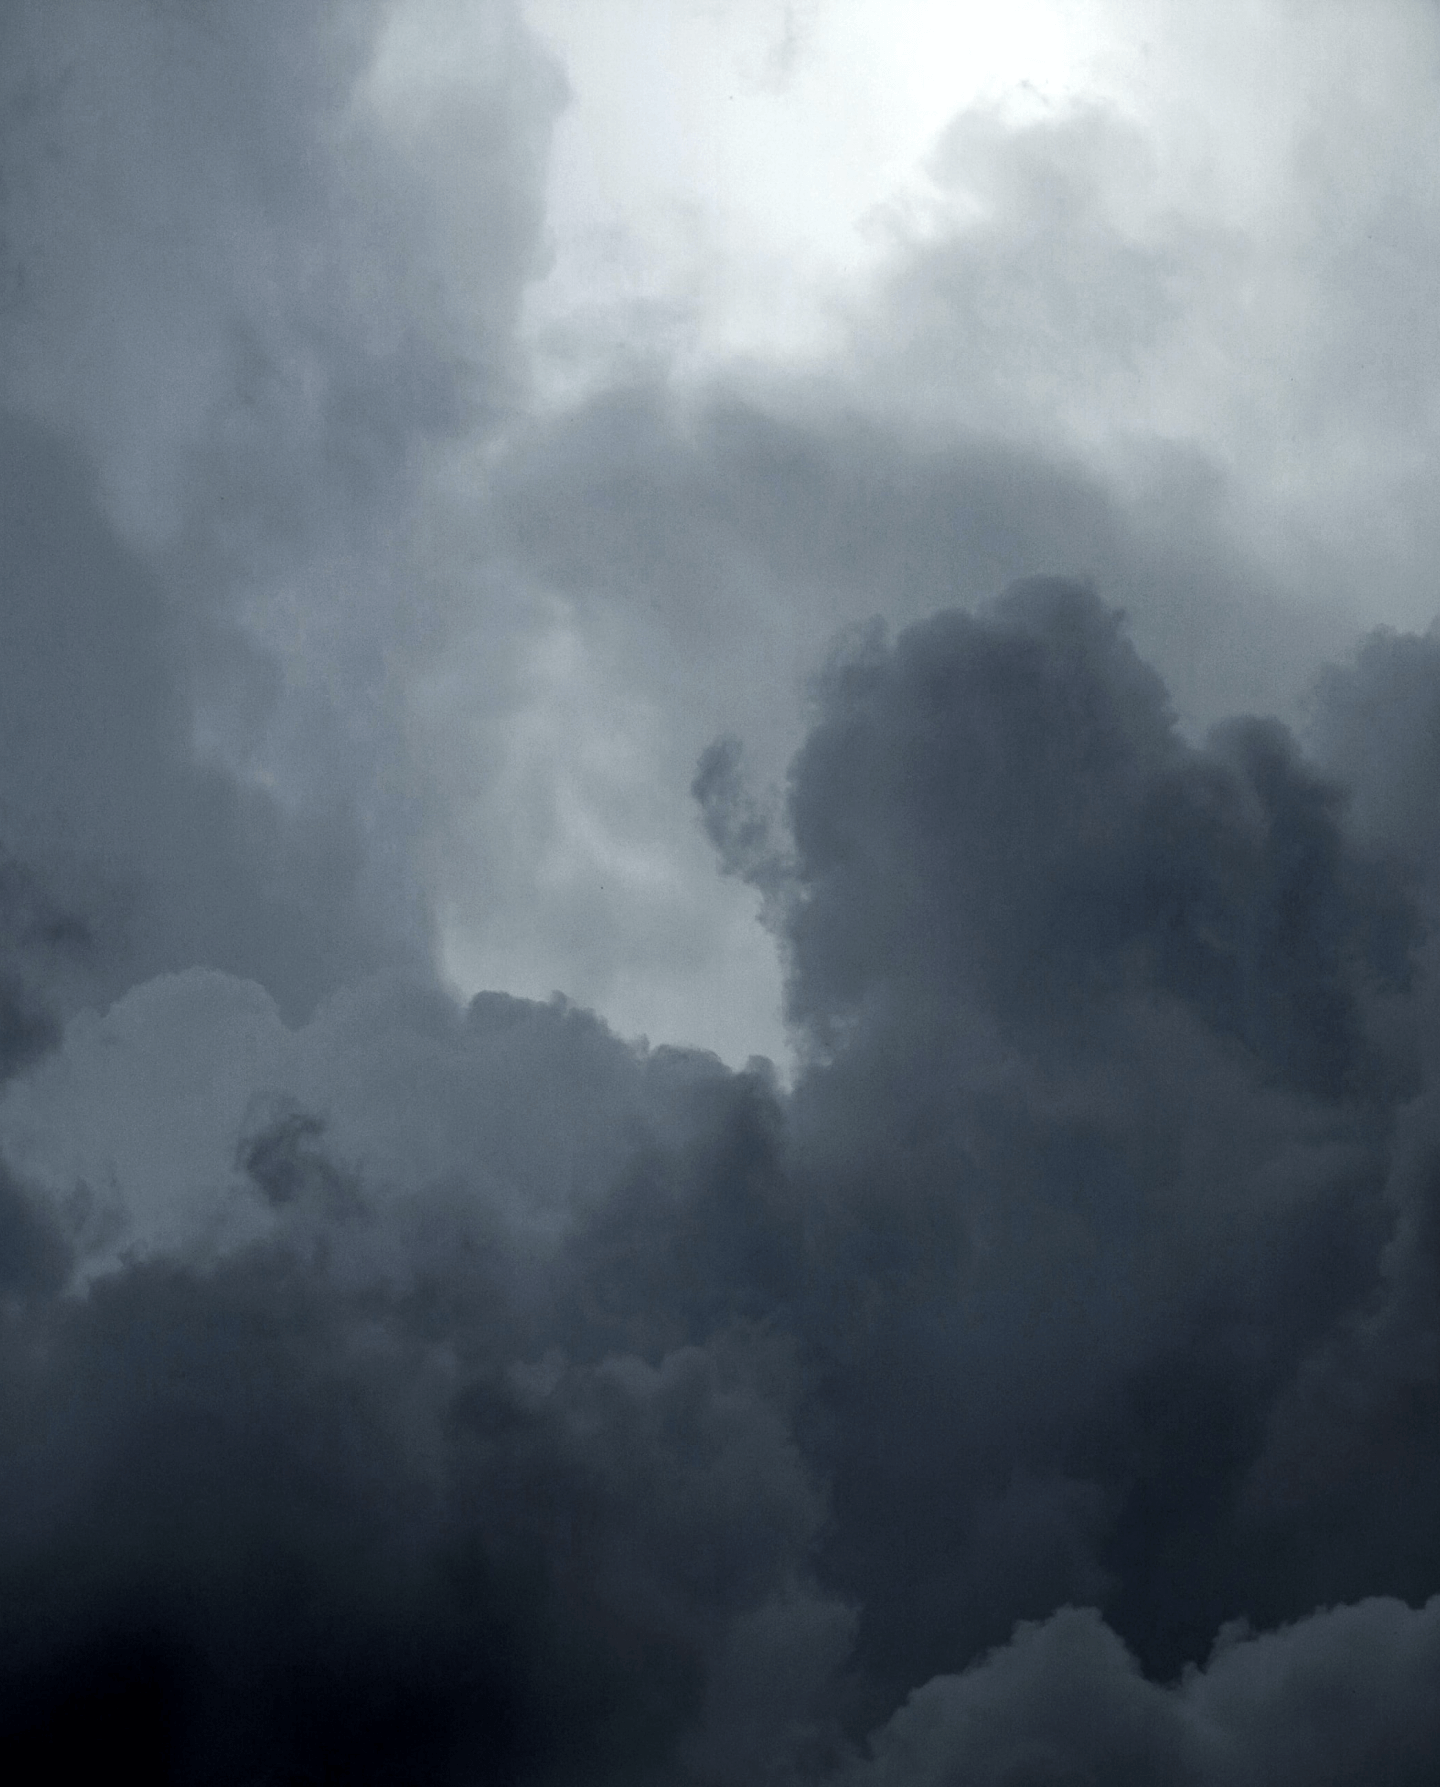 Background Image: a cloudy and gray sky